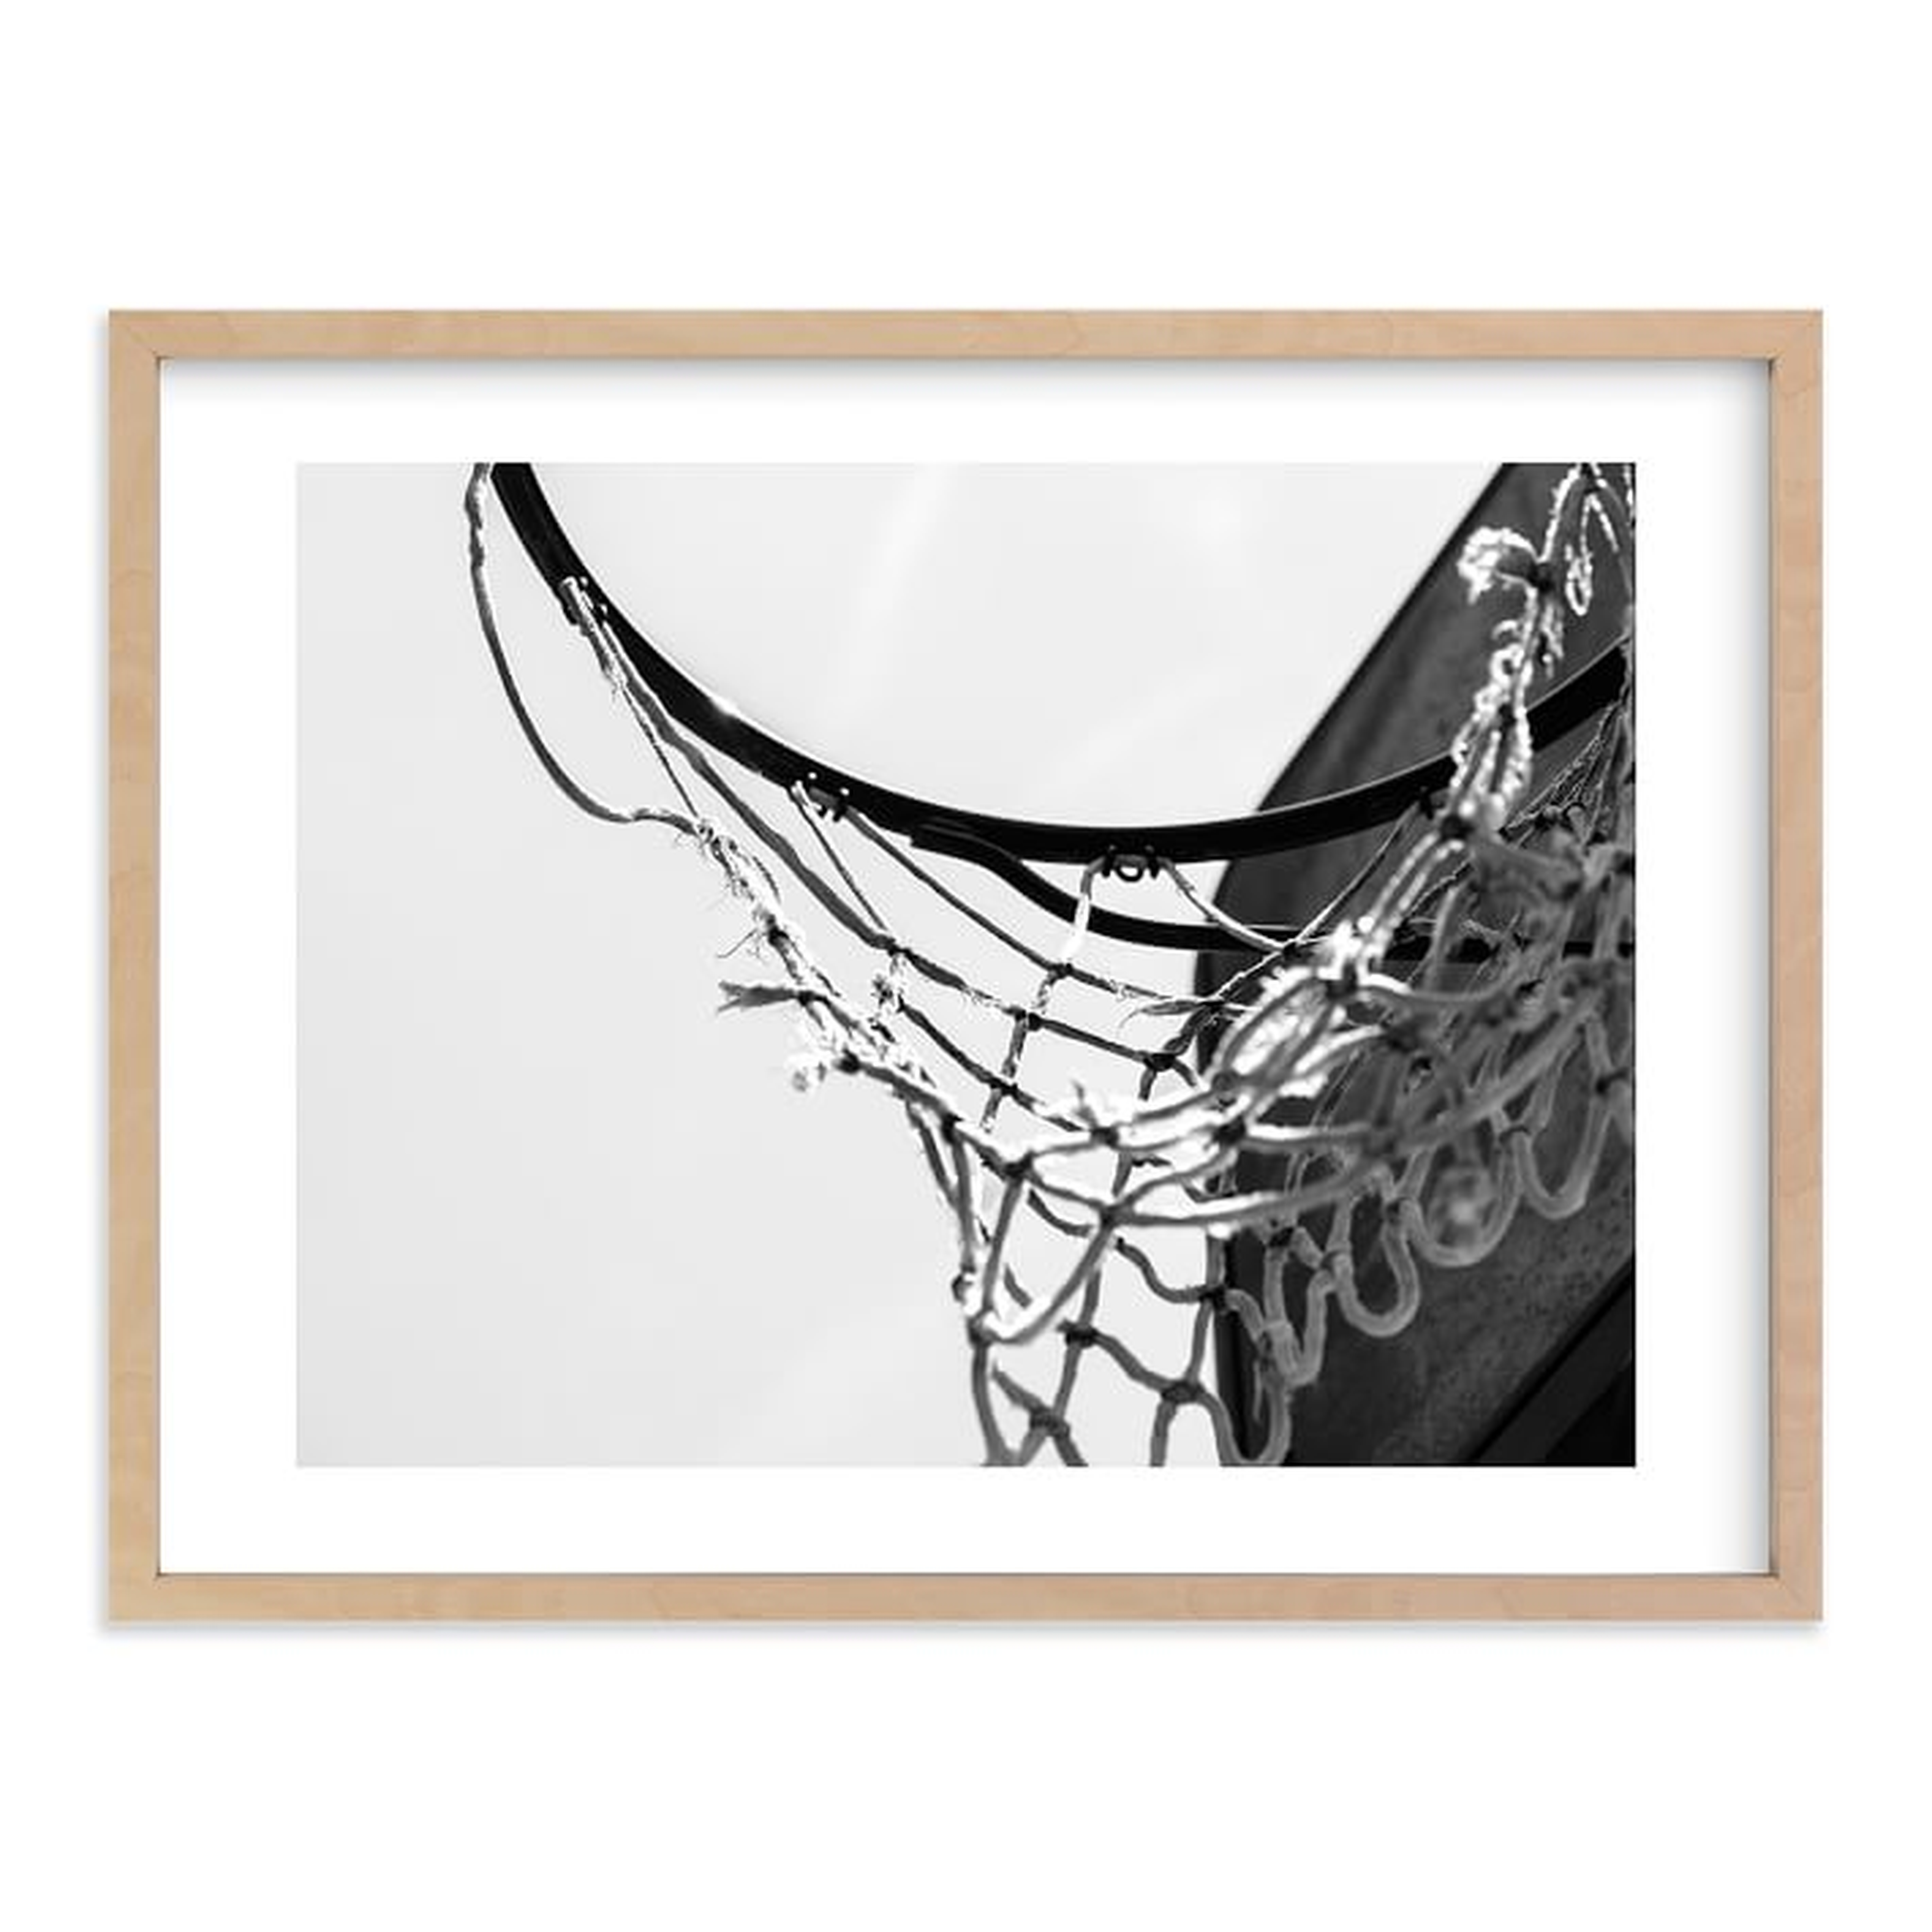 Hoop Dreamin' Wall Art By Minted®, 30"X40", Natural - Pottery Barn Teen